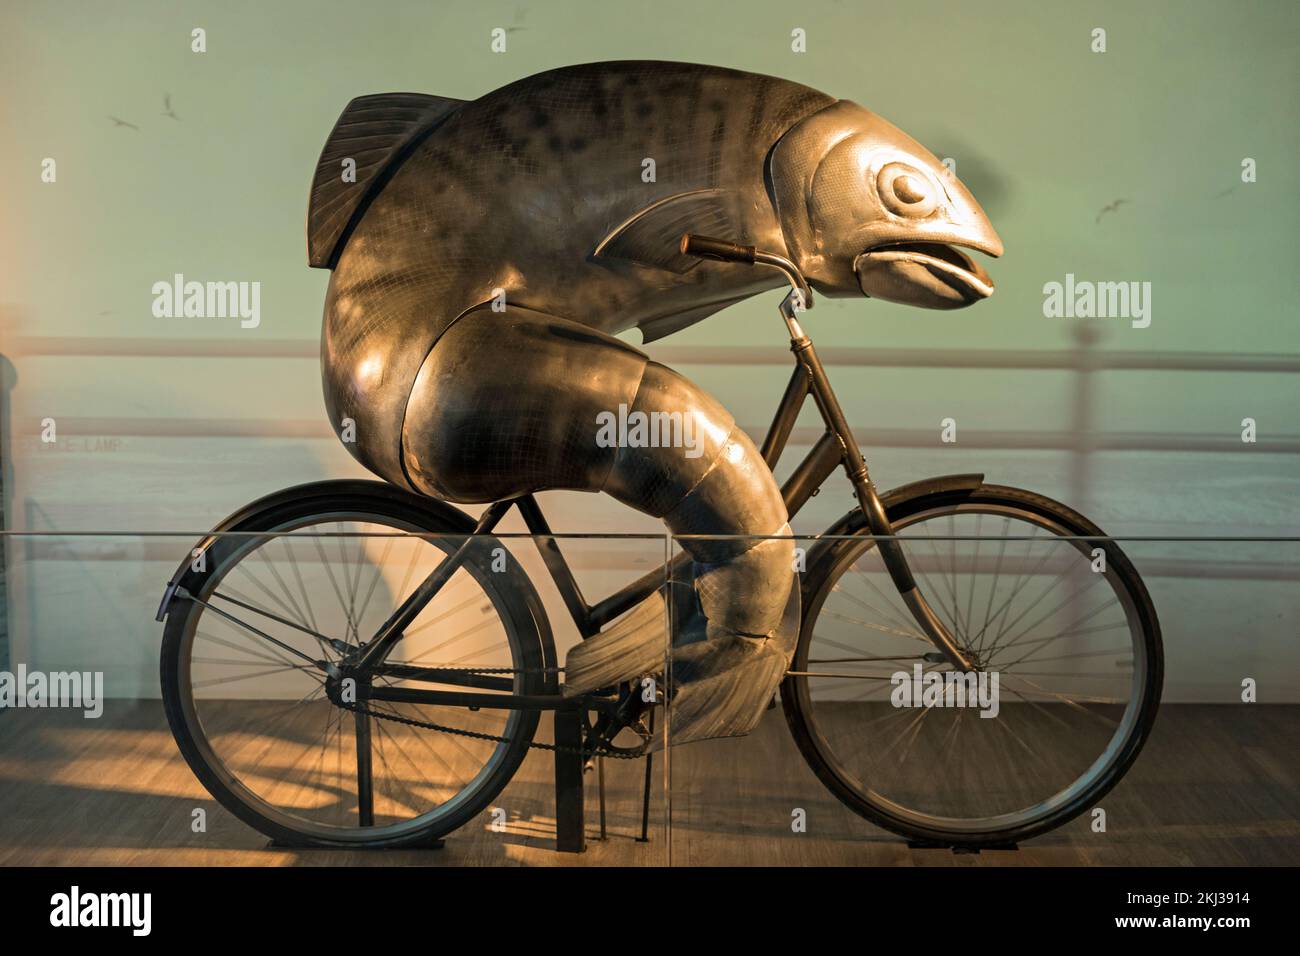 Ireland, Dublin,Guinness Storehouse, a fish riding a bicycle from a Guinness beer ad. A women needs a man like a fish needs a bicycle. Stock Photo